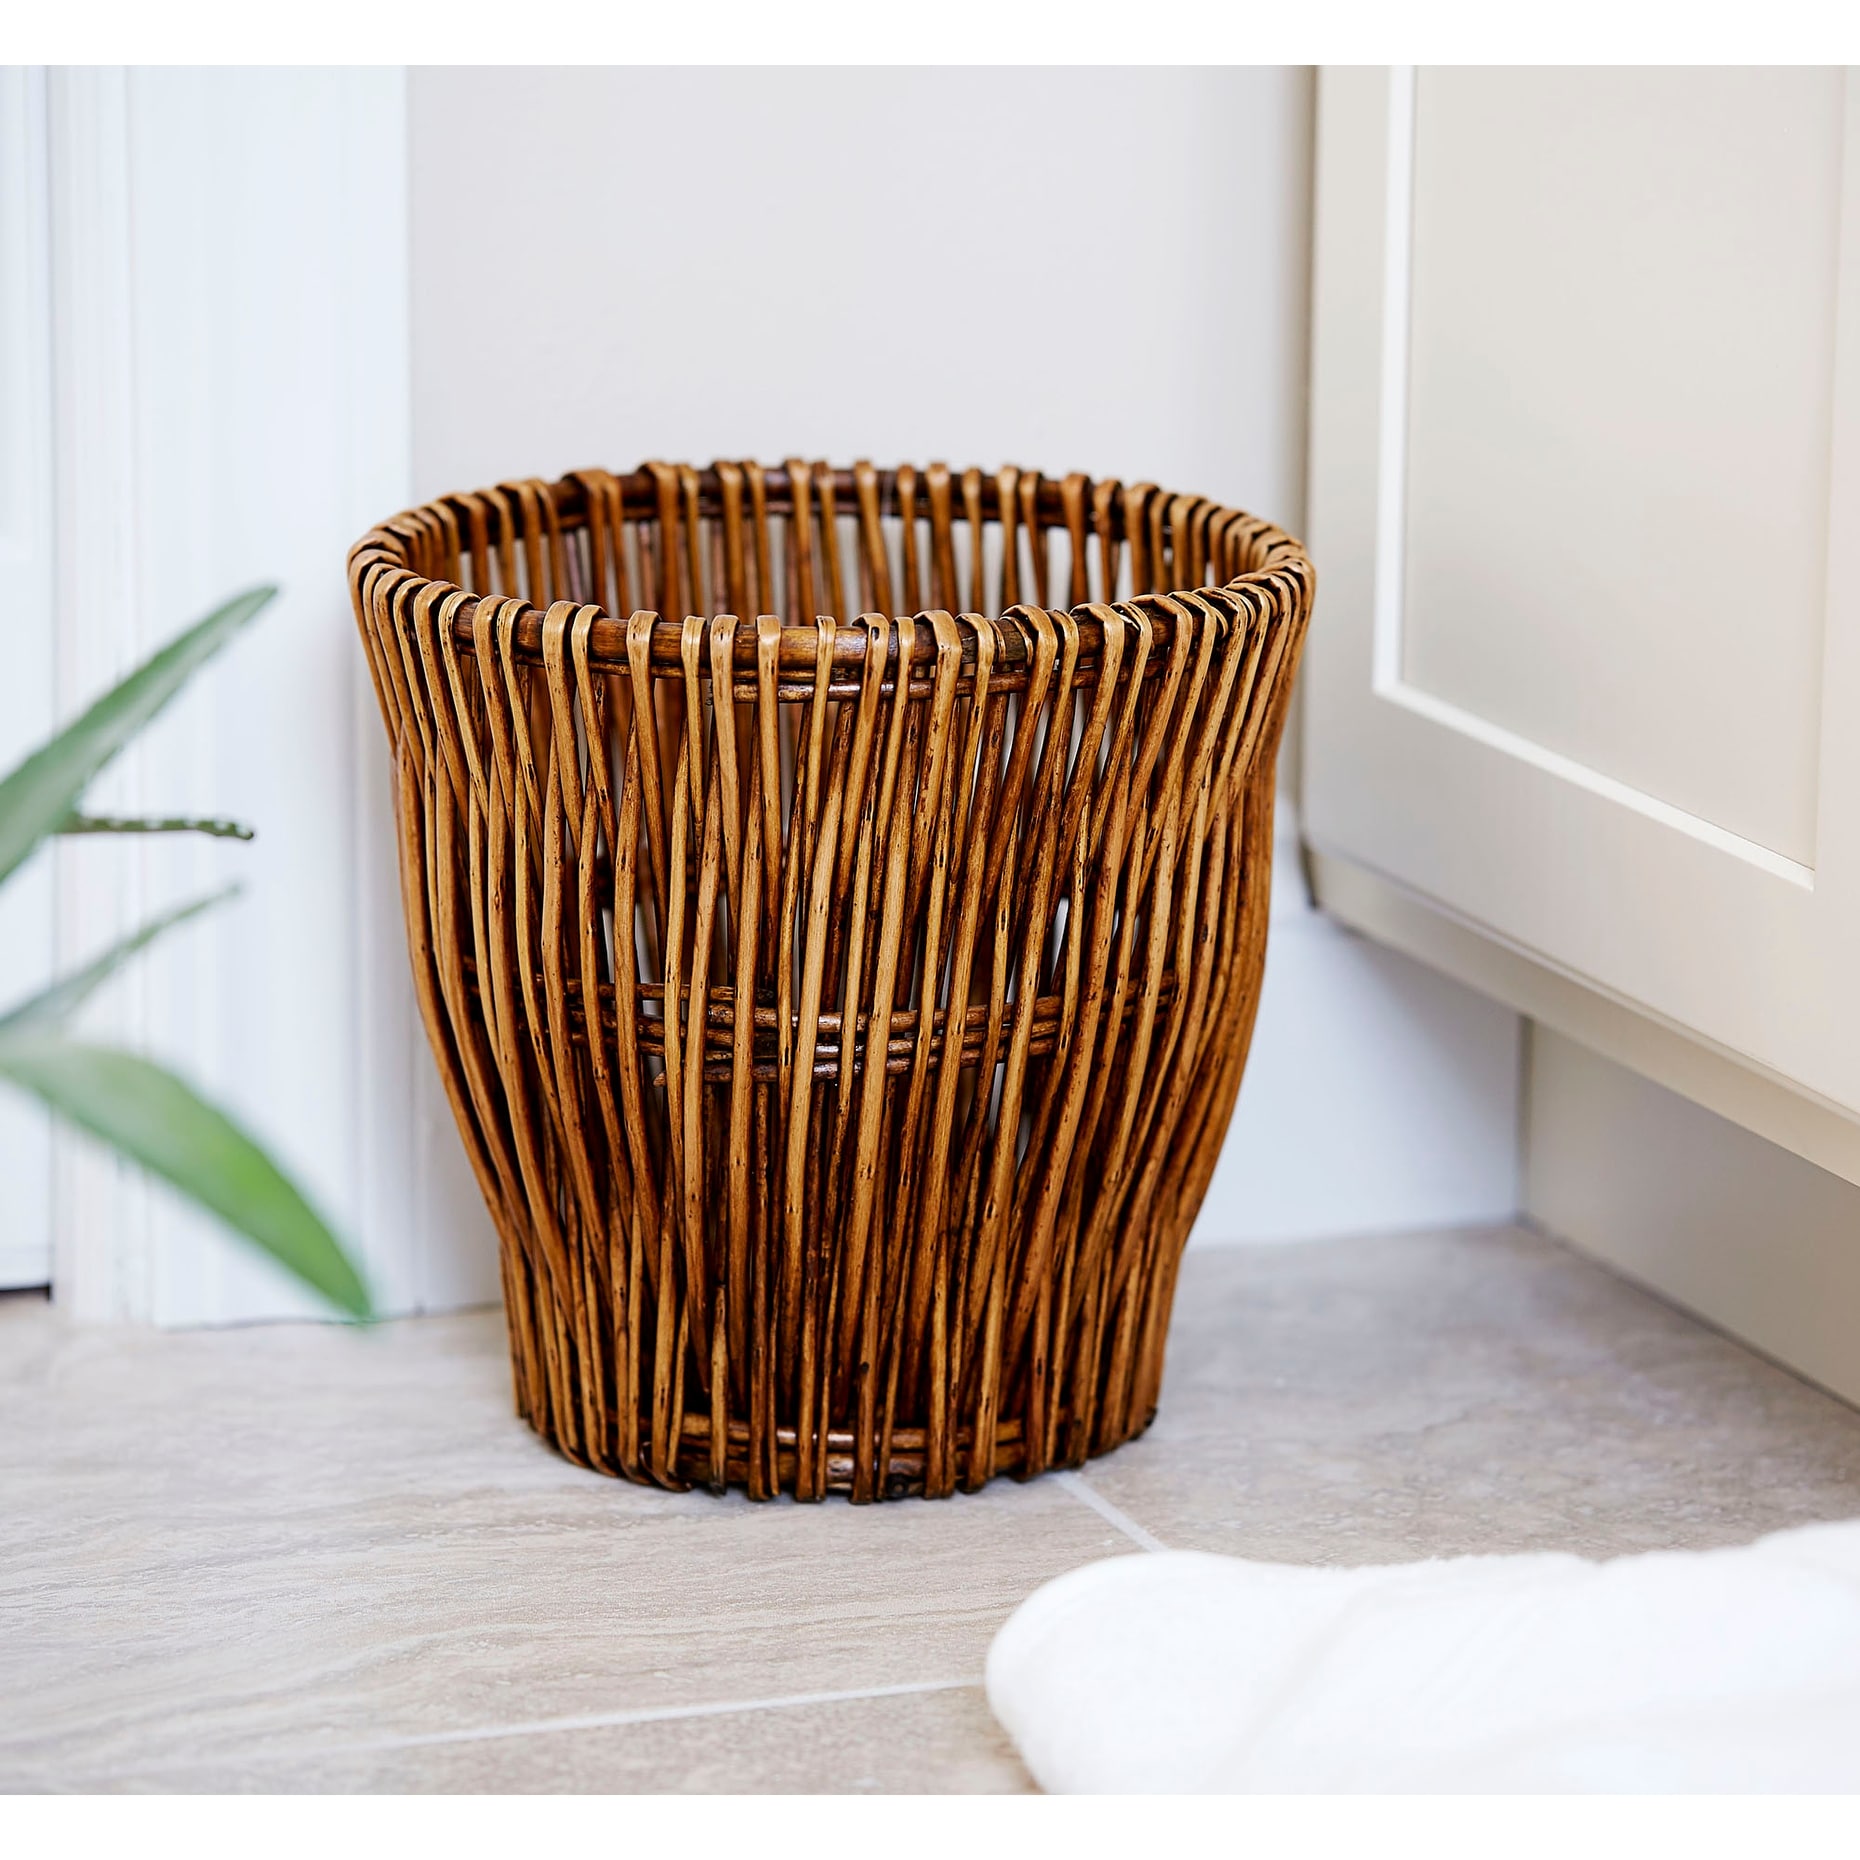 https://ak1.ostkcdn.com/images/products/is/images/direct/b307c270ec2c96211ea92e759c349d0053072e3a/Small-Reed-Willow-Waste-Basket.jpg